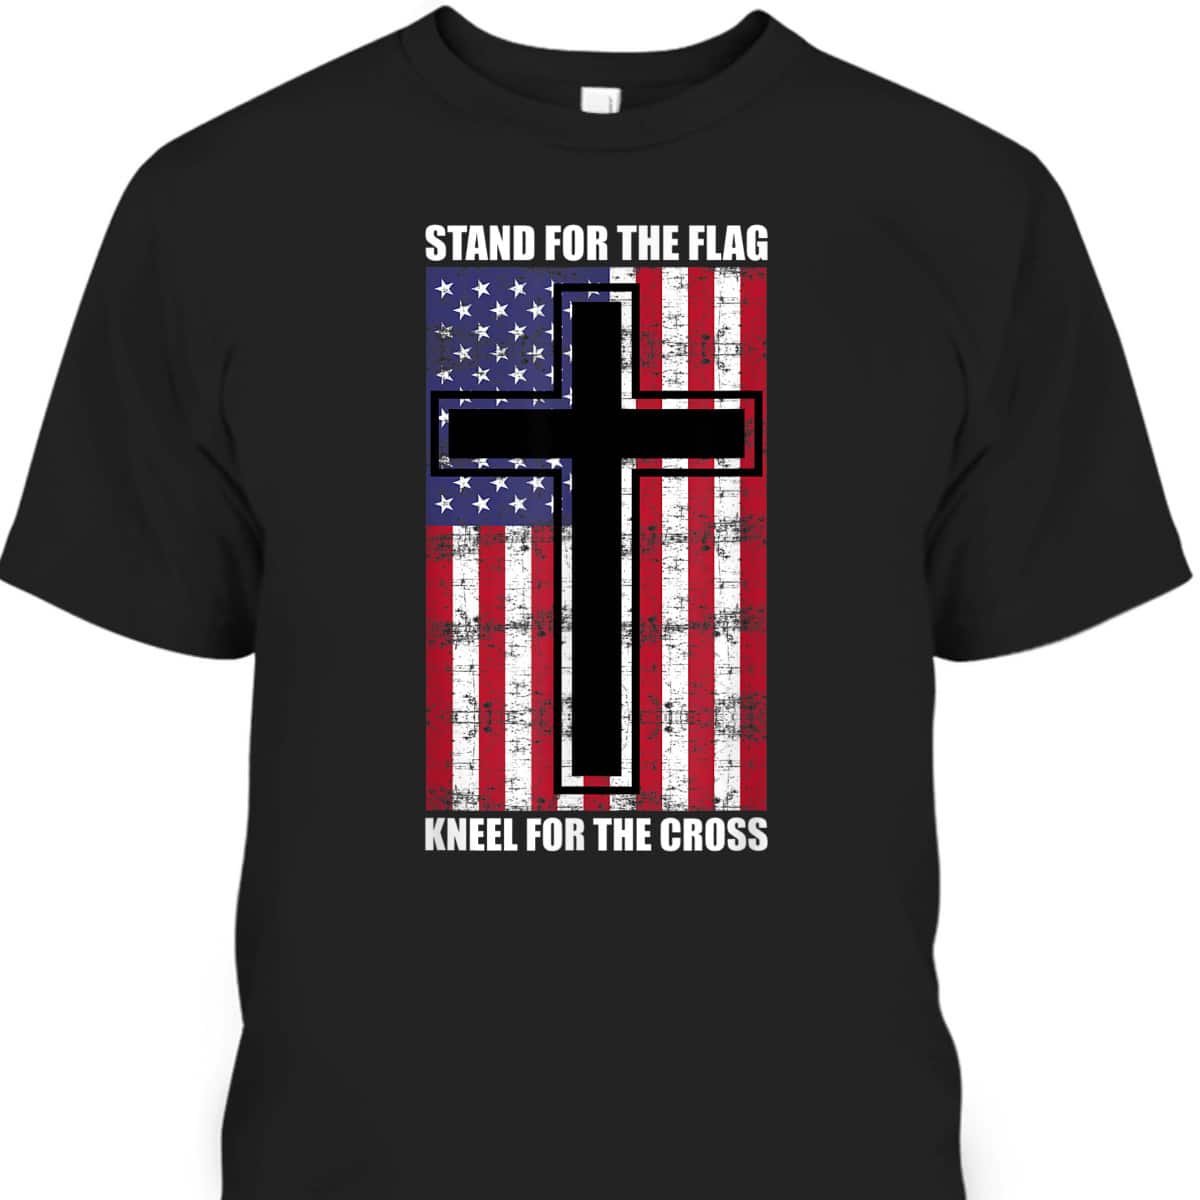 Stand For The Flag T-Shirt Kneel For The Cross